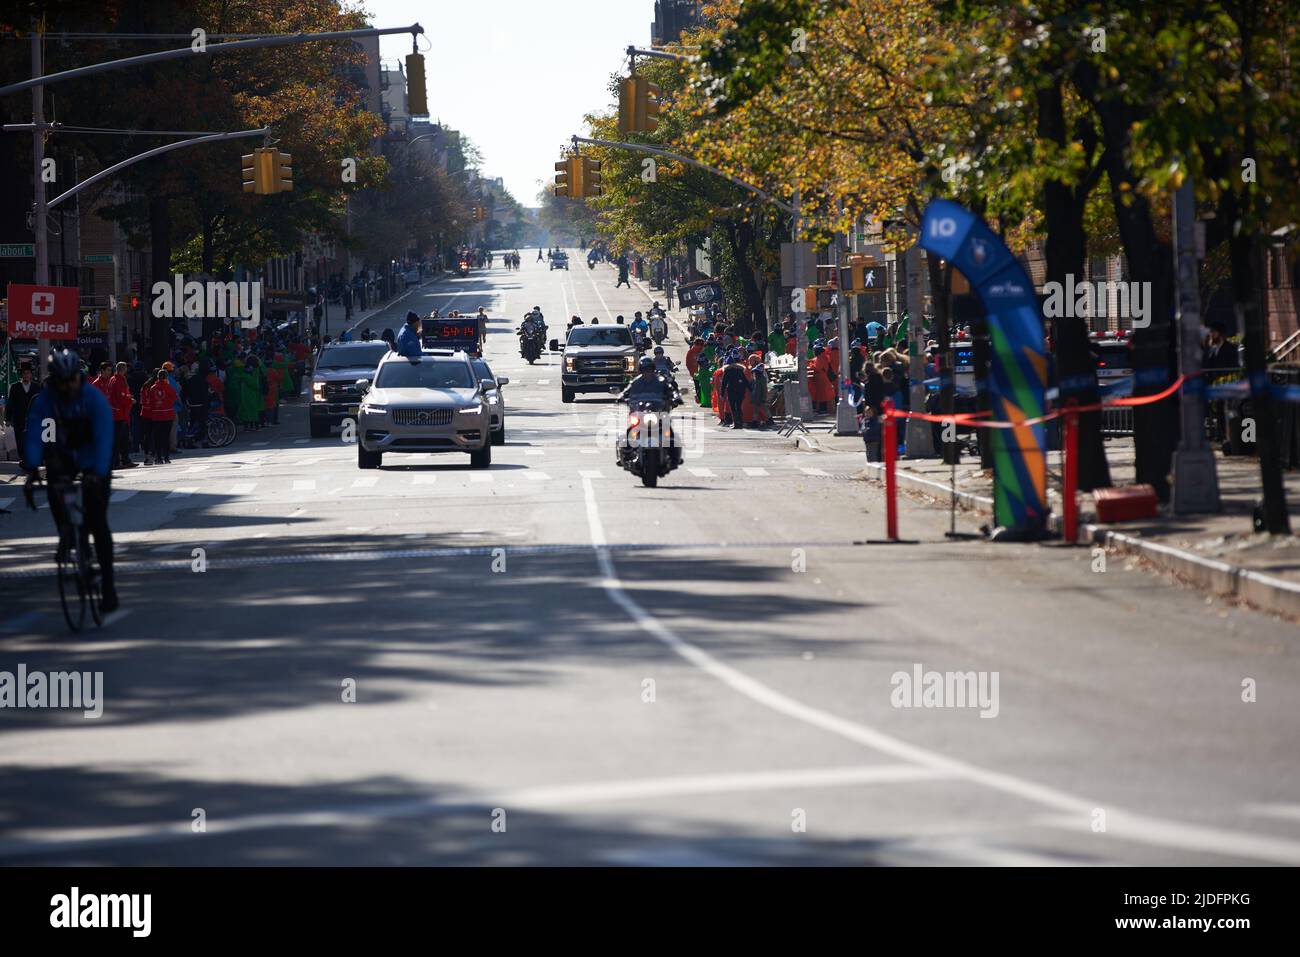 Brooklyn, New York,USA - November 3. 2019: Car with race clock in front of NYC Marathon runners. Police Motorcycle clearing streets for runners Stock Photo